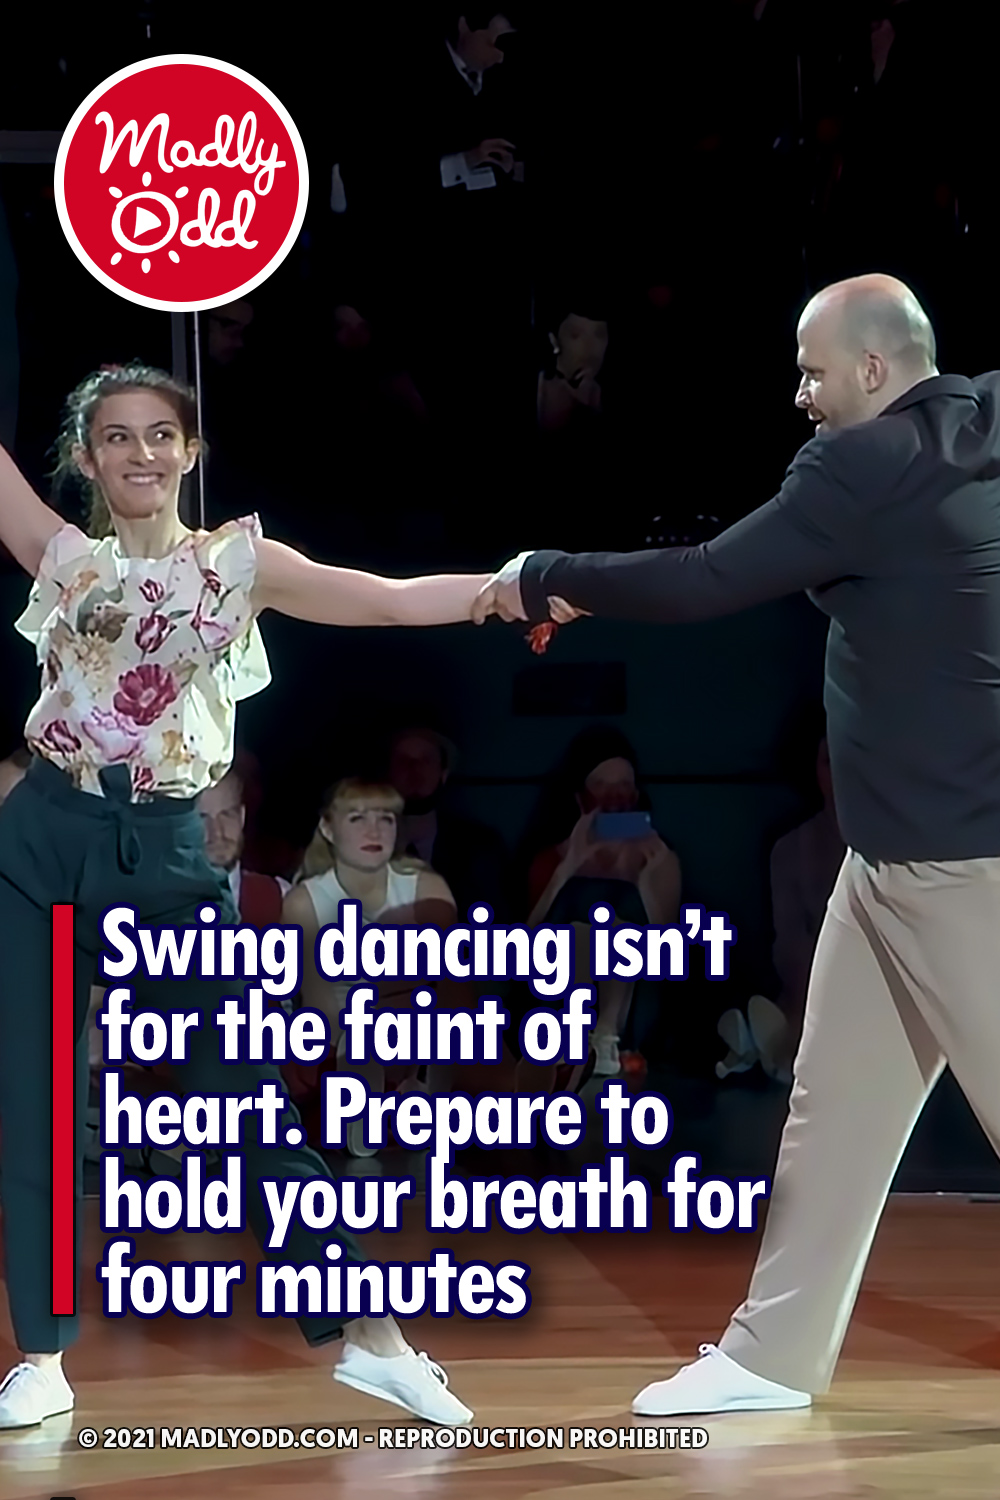 Swing dancing isn’t for the faint of heart. Prepare to hold your breath for four minutes